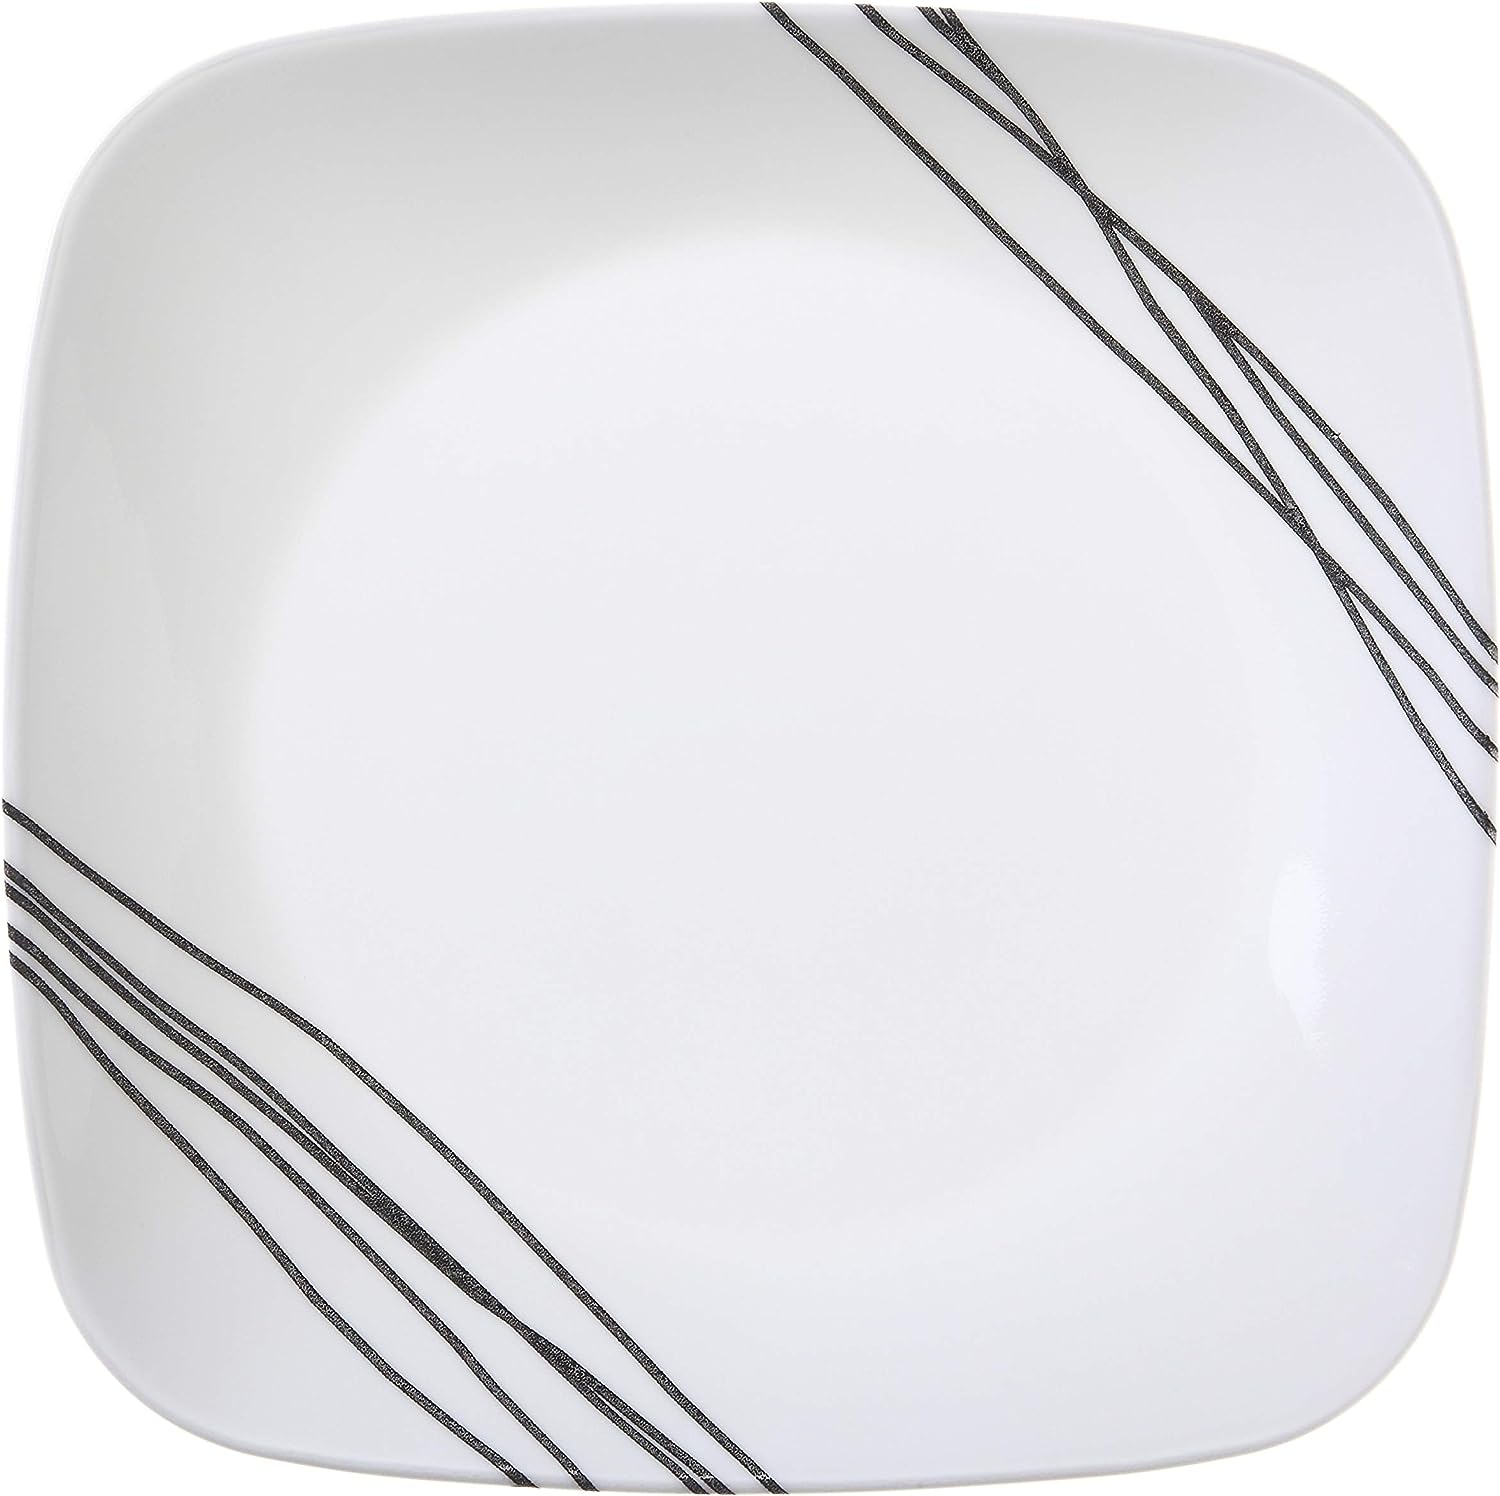 https://bigbigmart.com/wp-content/uploads/2023/08/Corelle-Vitrelle-18-Piece-Service-for-6-Dinnerware-Set-Triple-Layer-Glass-and-Chip-Resistant-Lightweight-Square-Plates-and-Bowls-Set-Simple-Sketch4.jpg